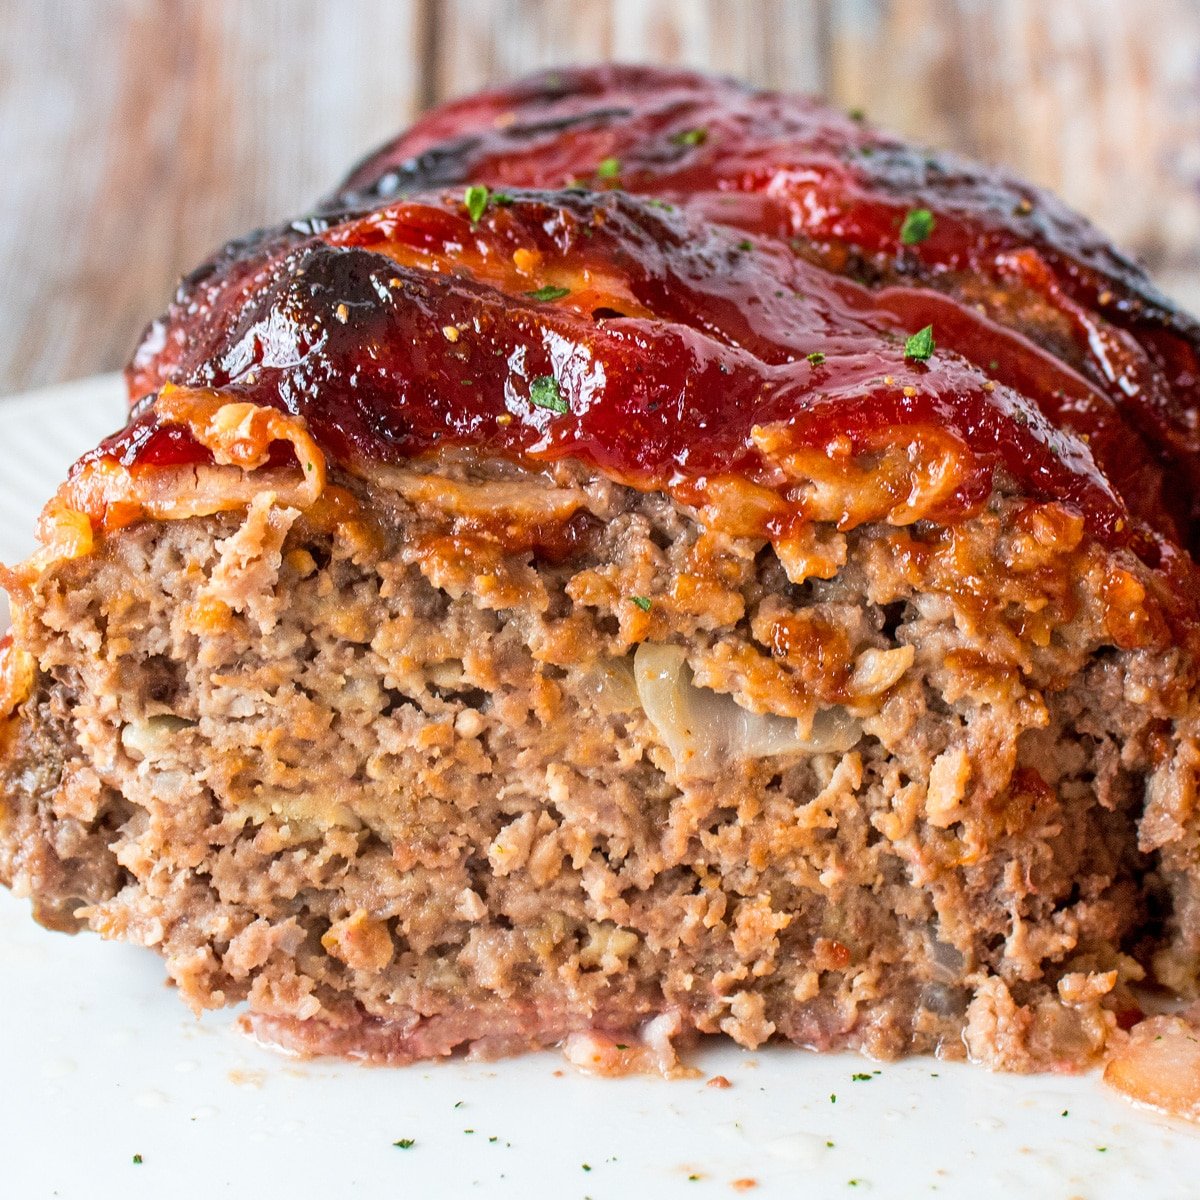 Square image of a bacon wrapped meatloaf.